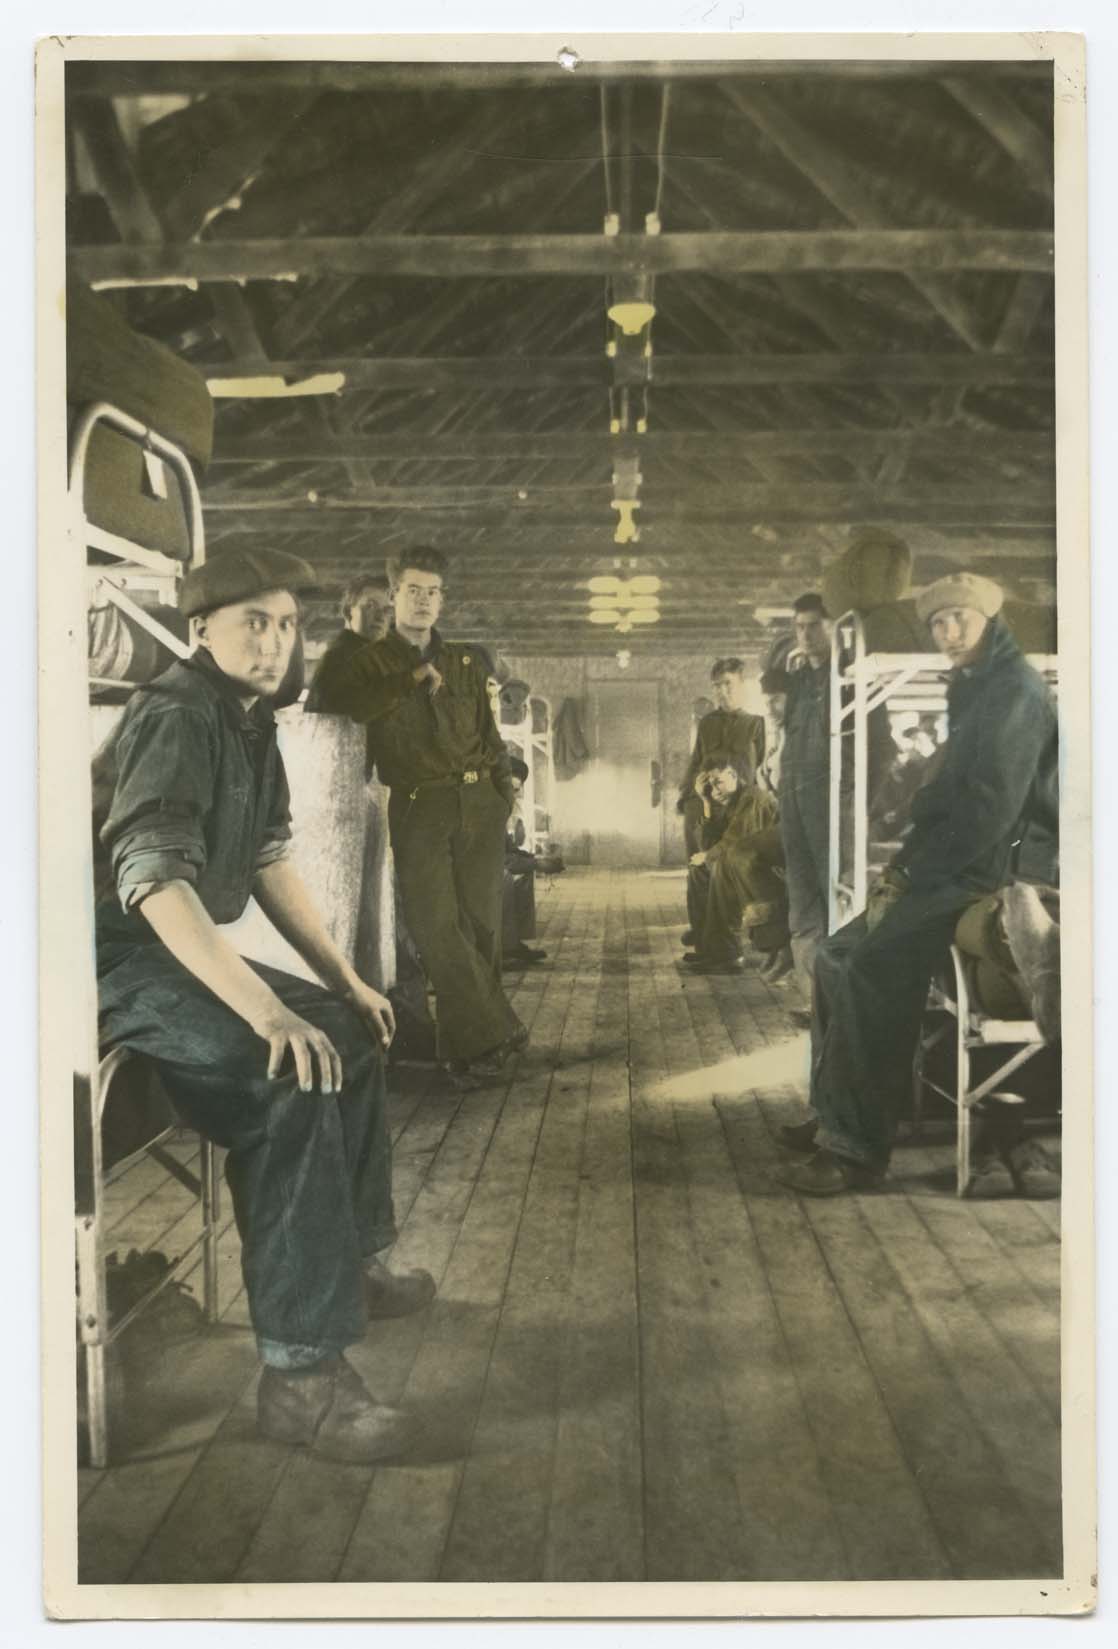 Members of the Civilian Conservation Corps (CCC) Camp 794 in barracks at International Peace Garden (Man. and N.D.). Man closest to camera is Harold Archers, other men unidentified